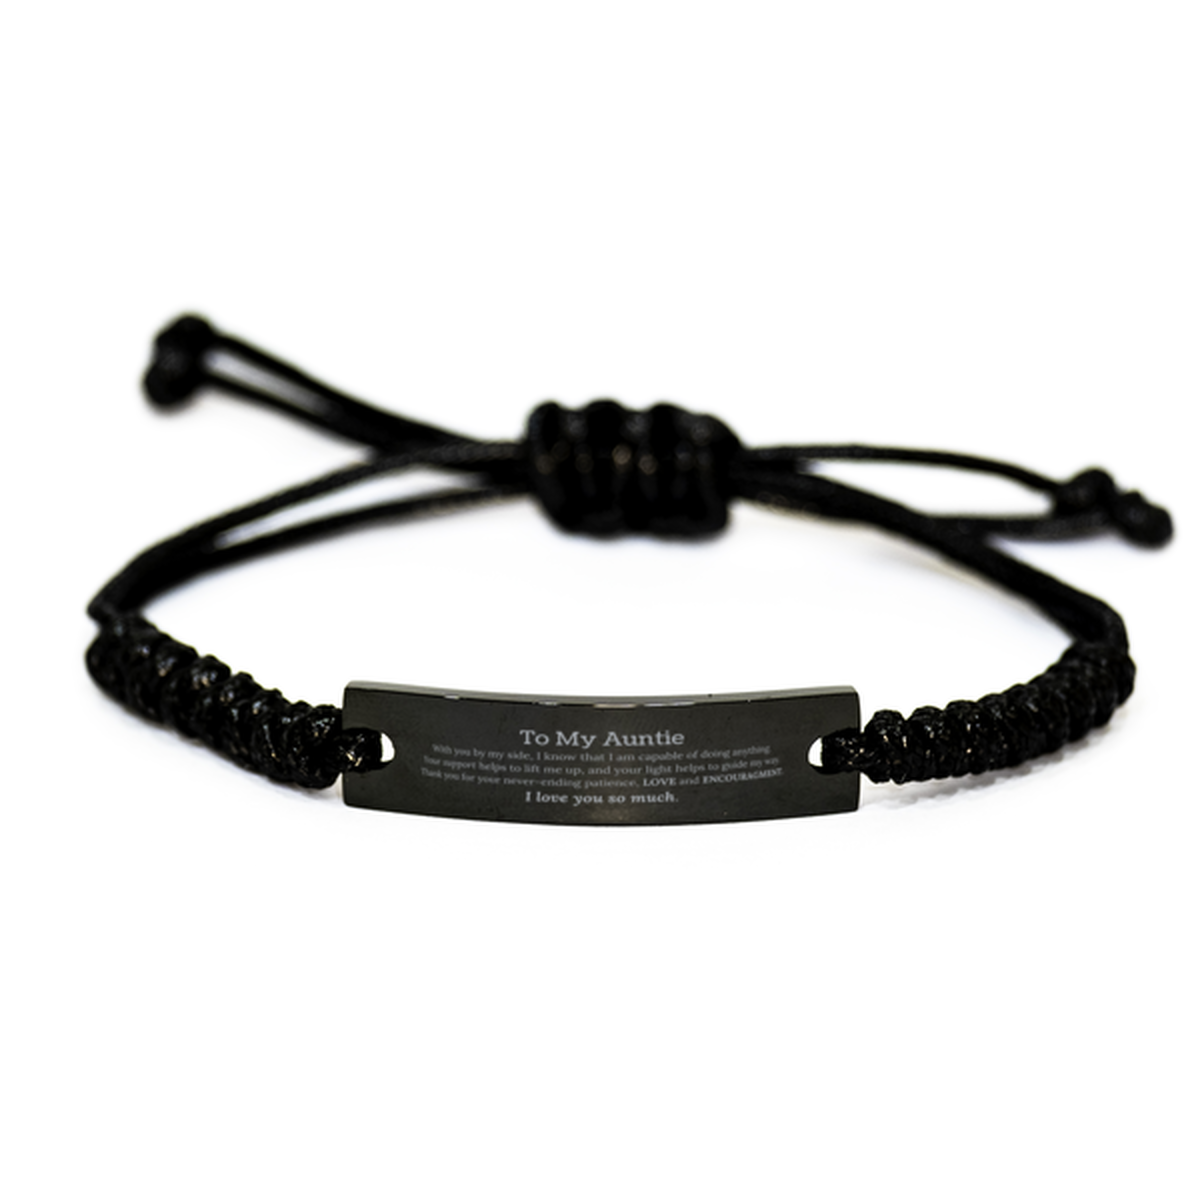 Appreciation Auntie Black Rope Bracelet Gifts, To My Auntie Birthday Christmas Wedding Keepsake Gifts for Auntie With you by my side, I know that I am capable of doing anything. I love you so much